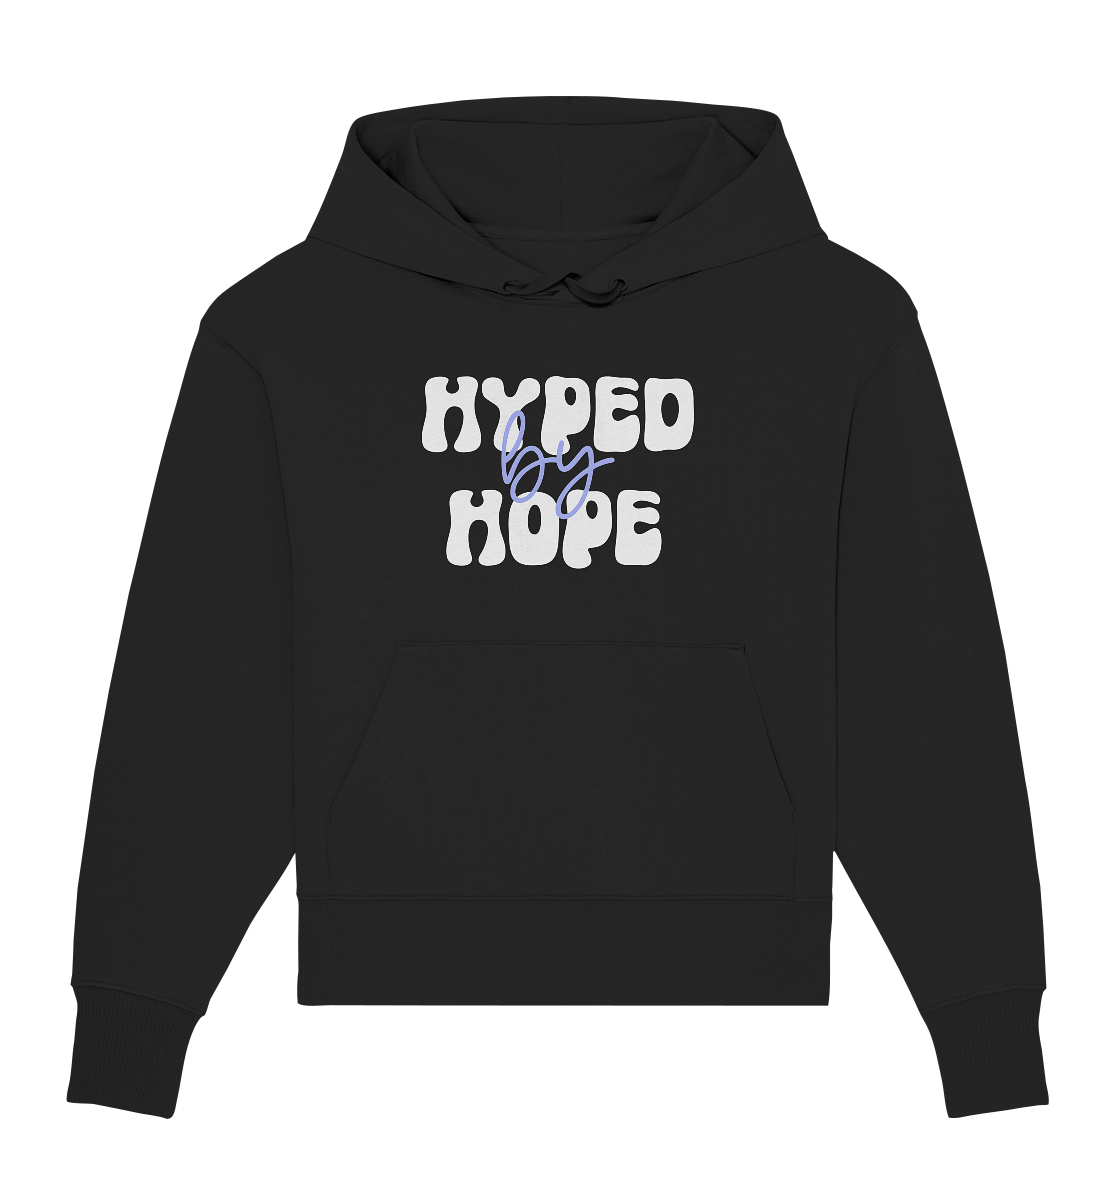 HYPED BY HOPE - Organic Oversize Hoodie